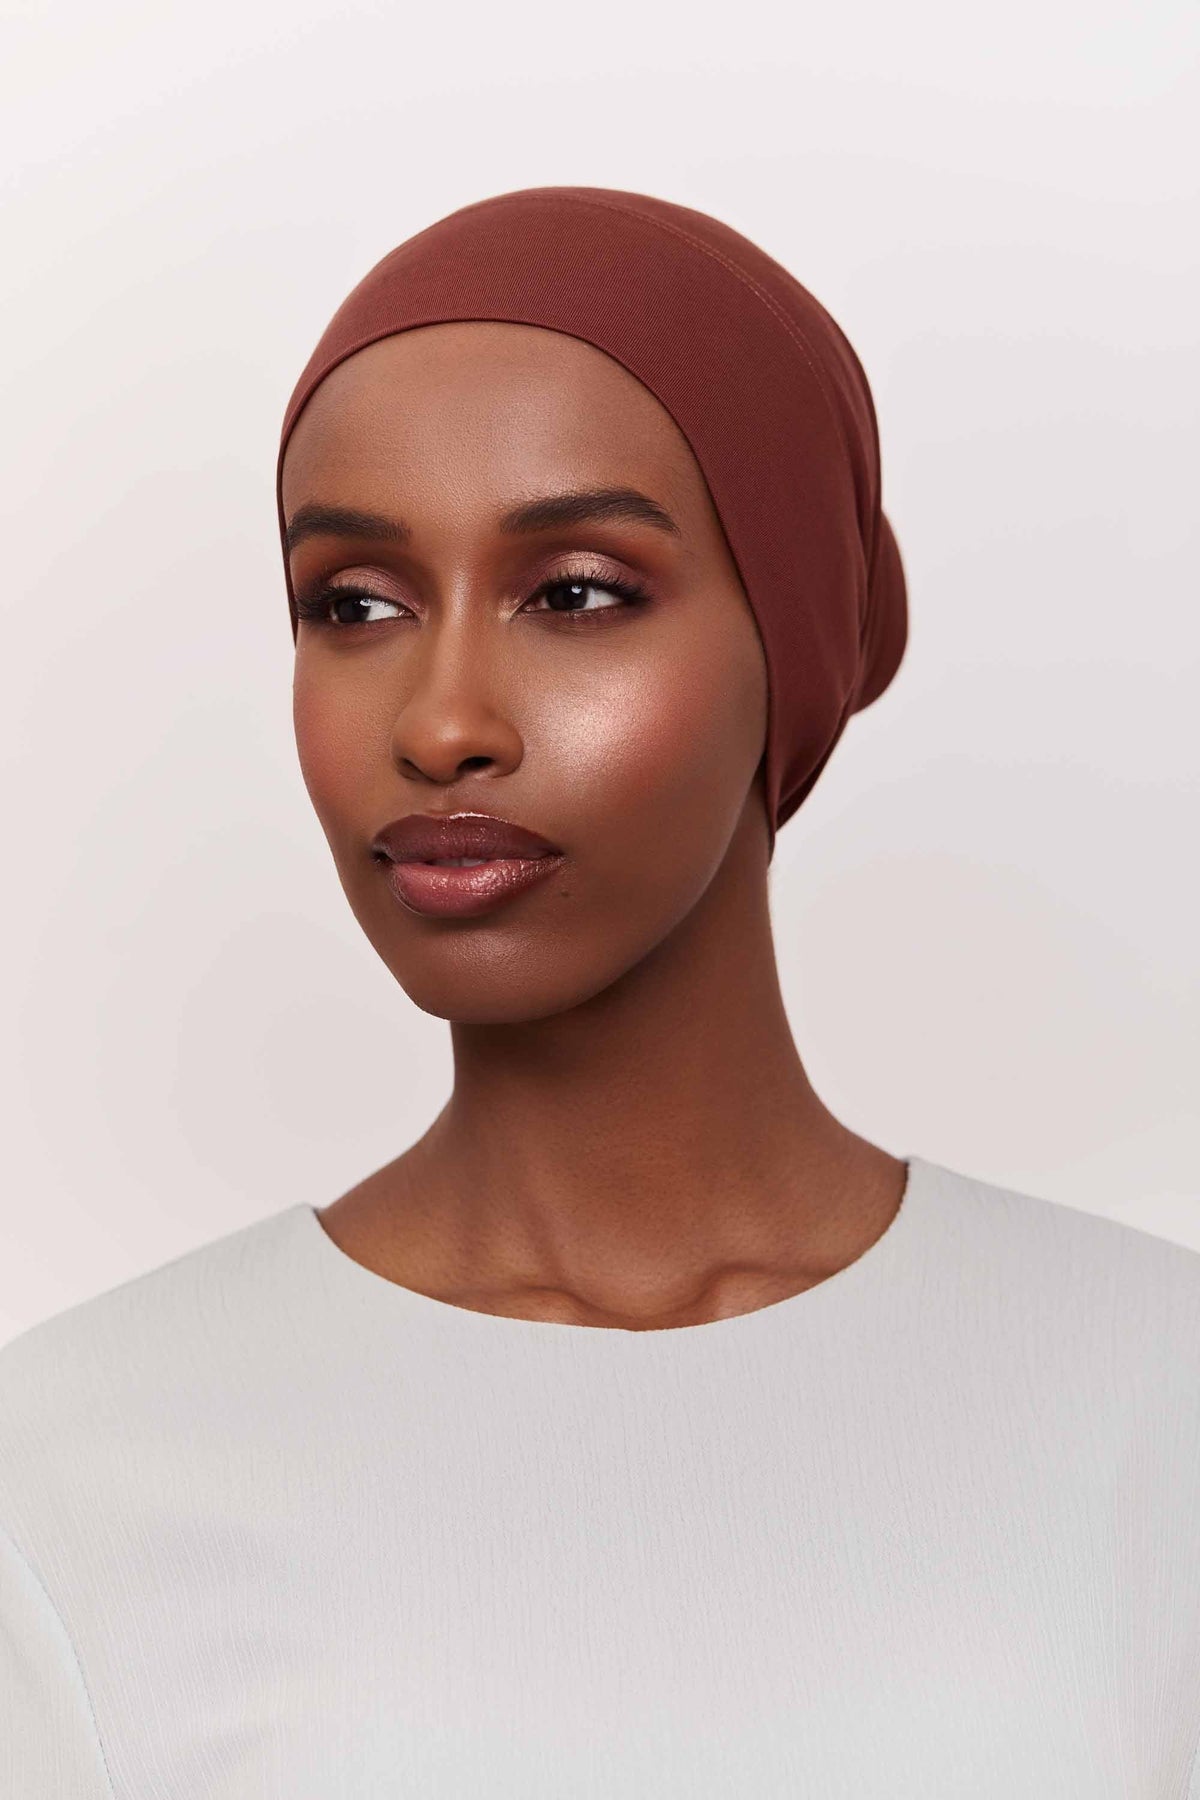 Cotton Undercap - Chocolate Fondant Extra Small Accessories Veiled Collection 